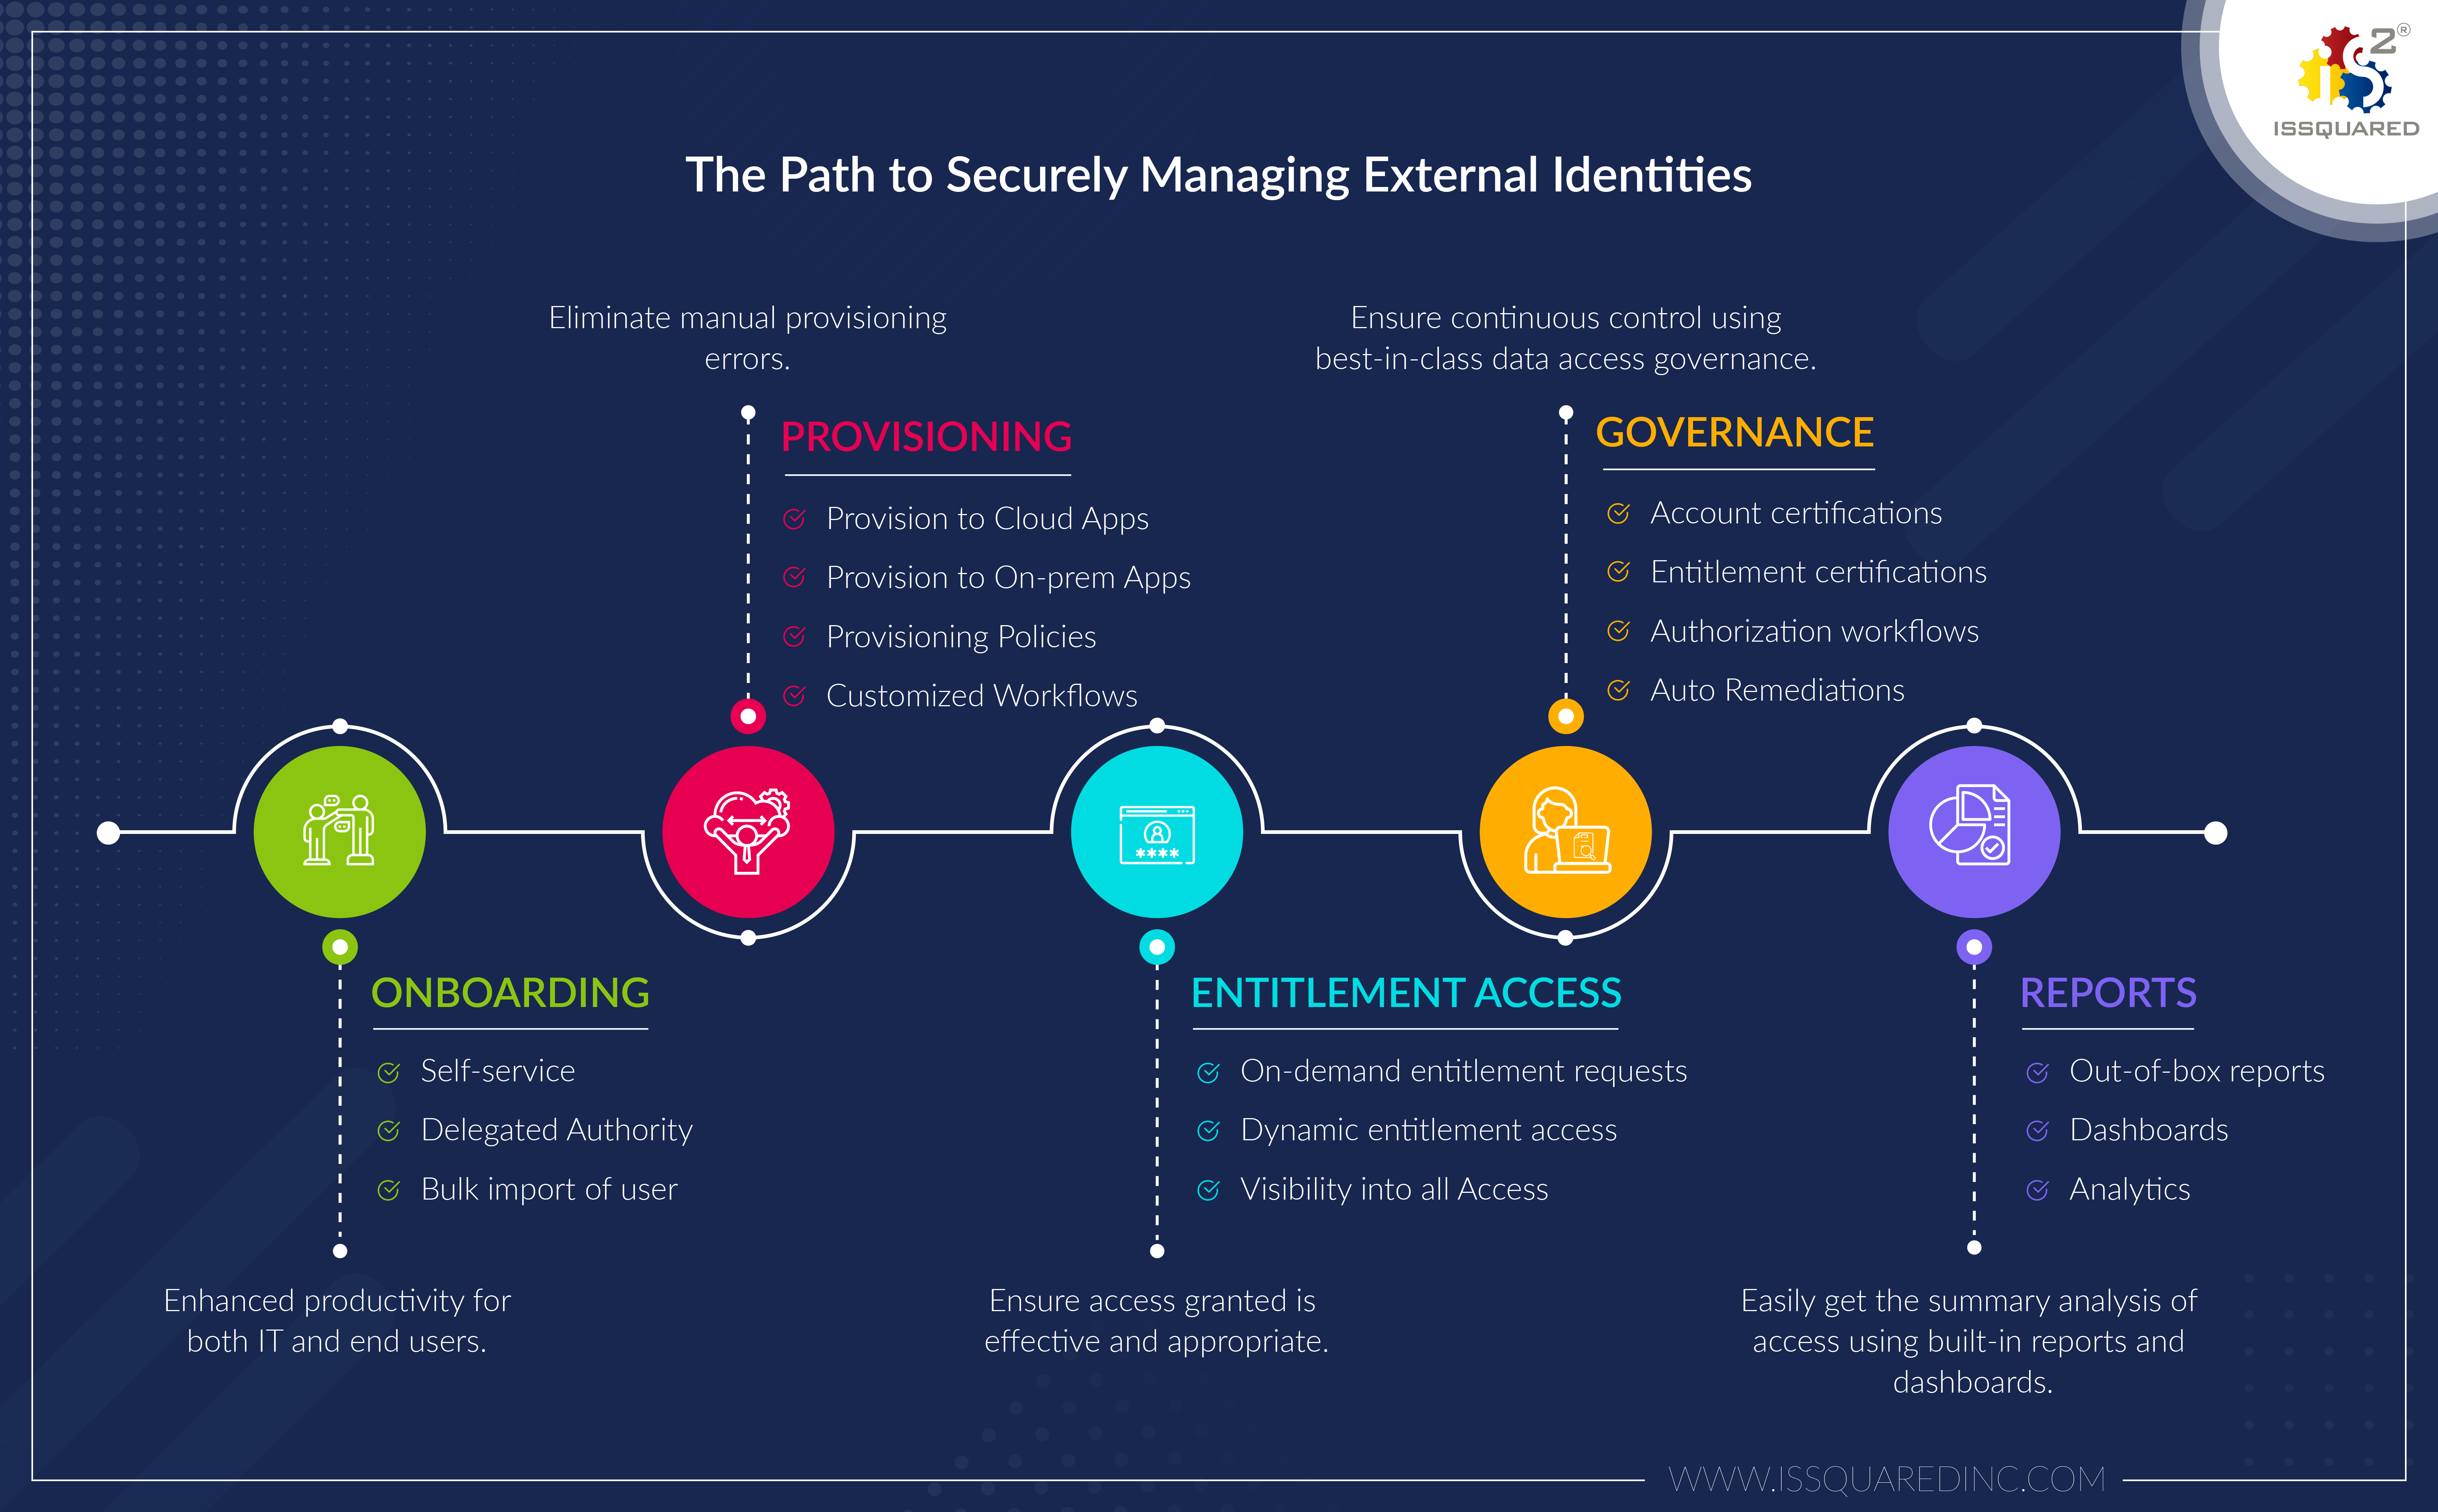 EIAG - Manage External Identities and Thier Access